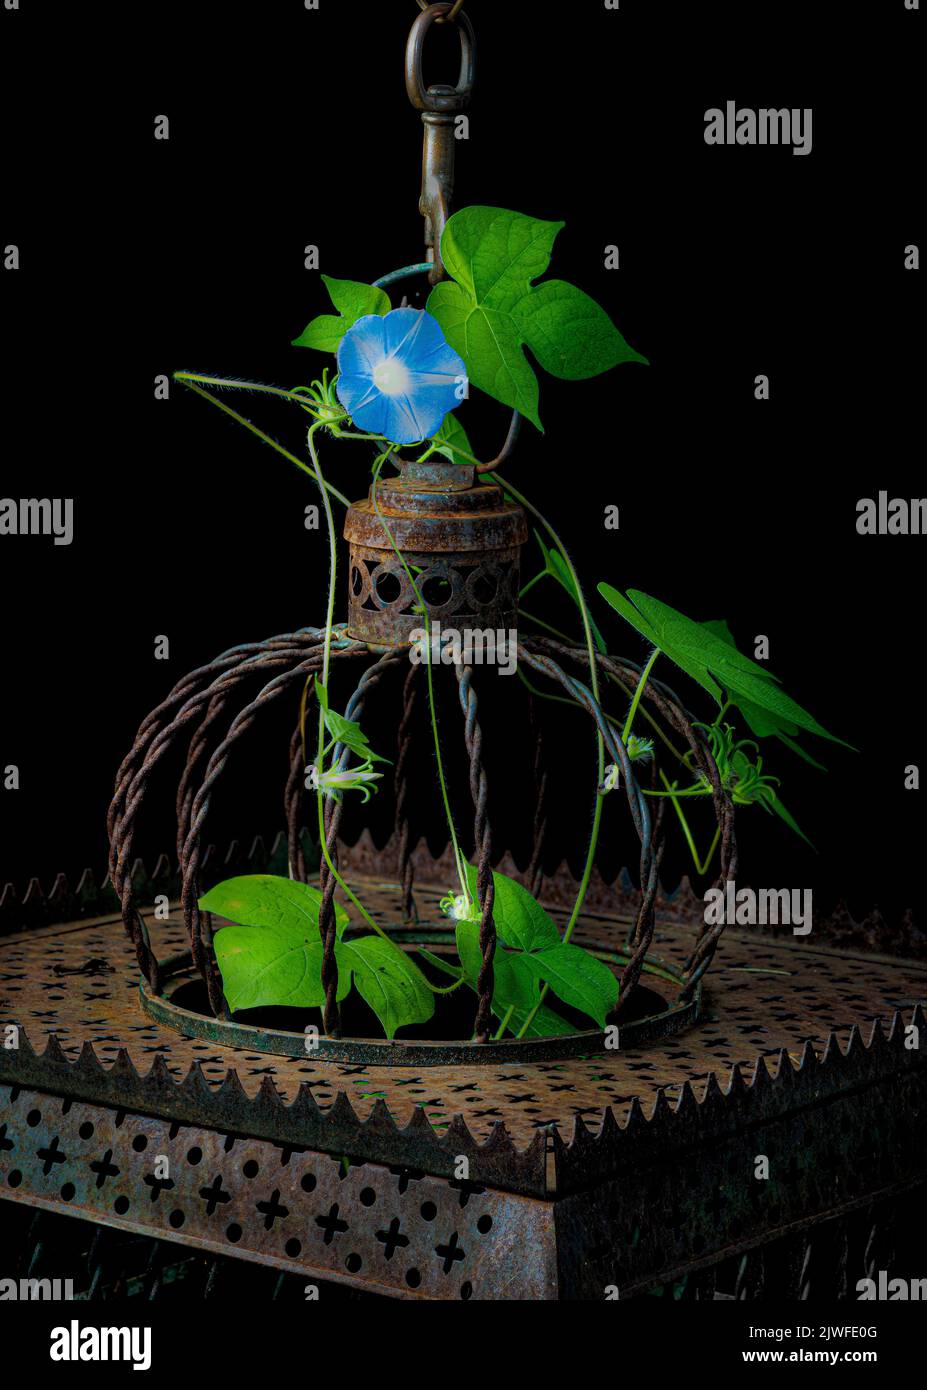 Ivy-leaf morning glory plant (Ipomoea hederacea) growing inside antique metal birdcage. Stock Photo